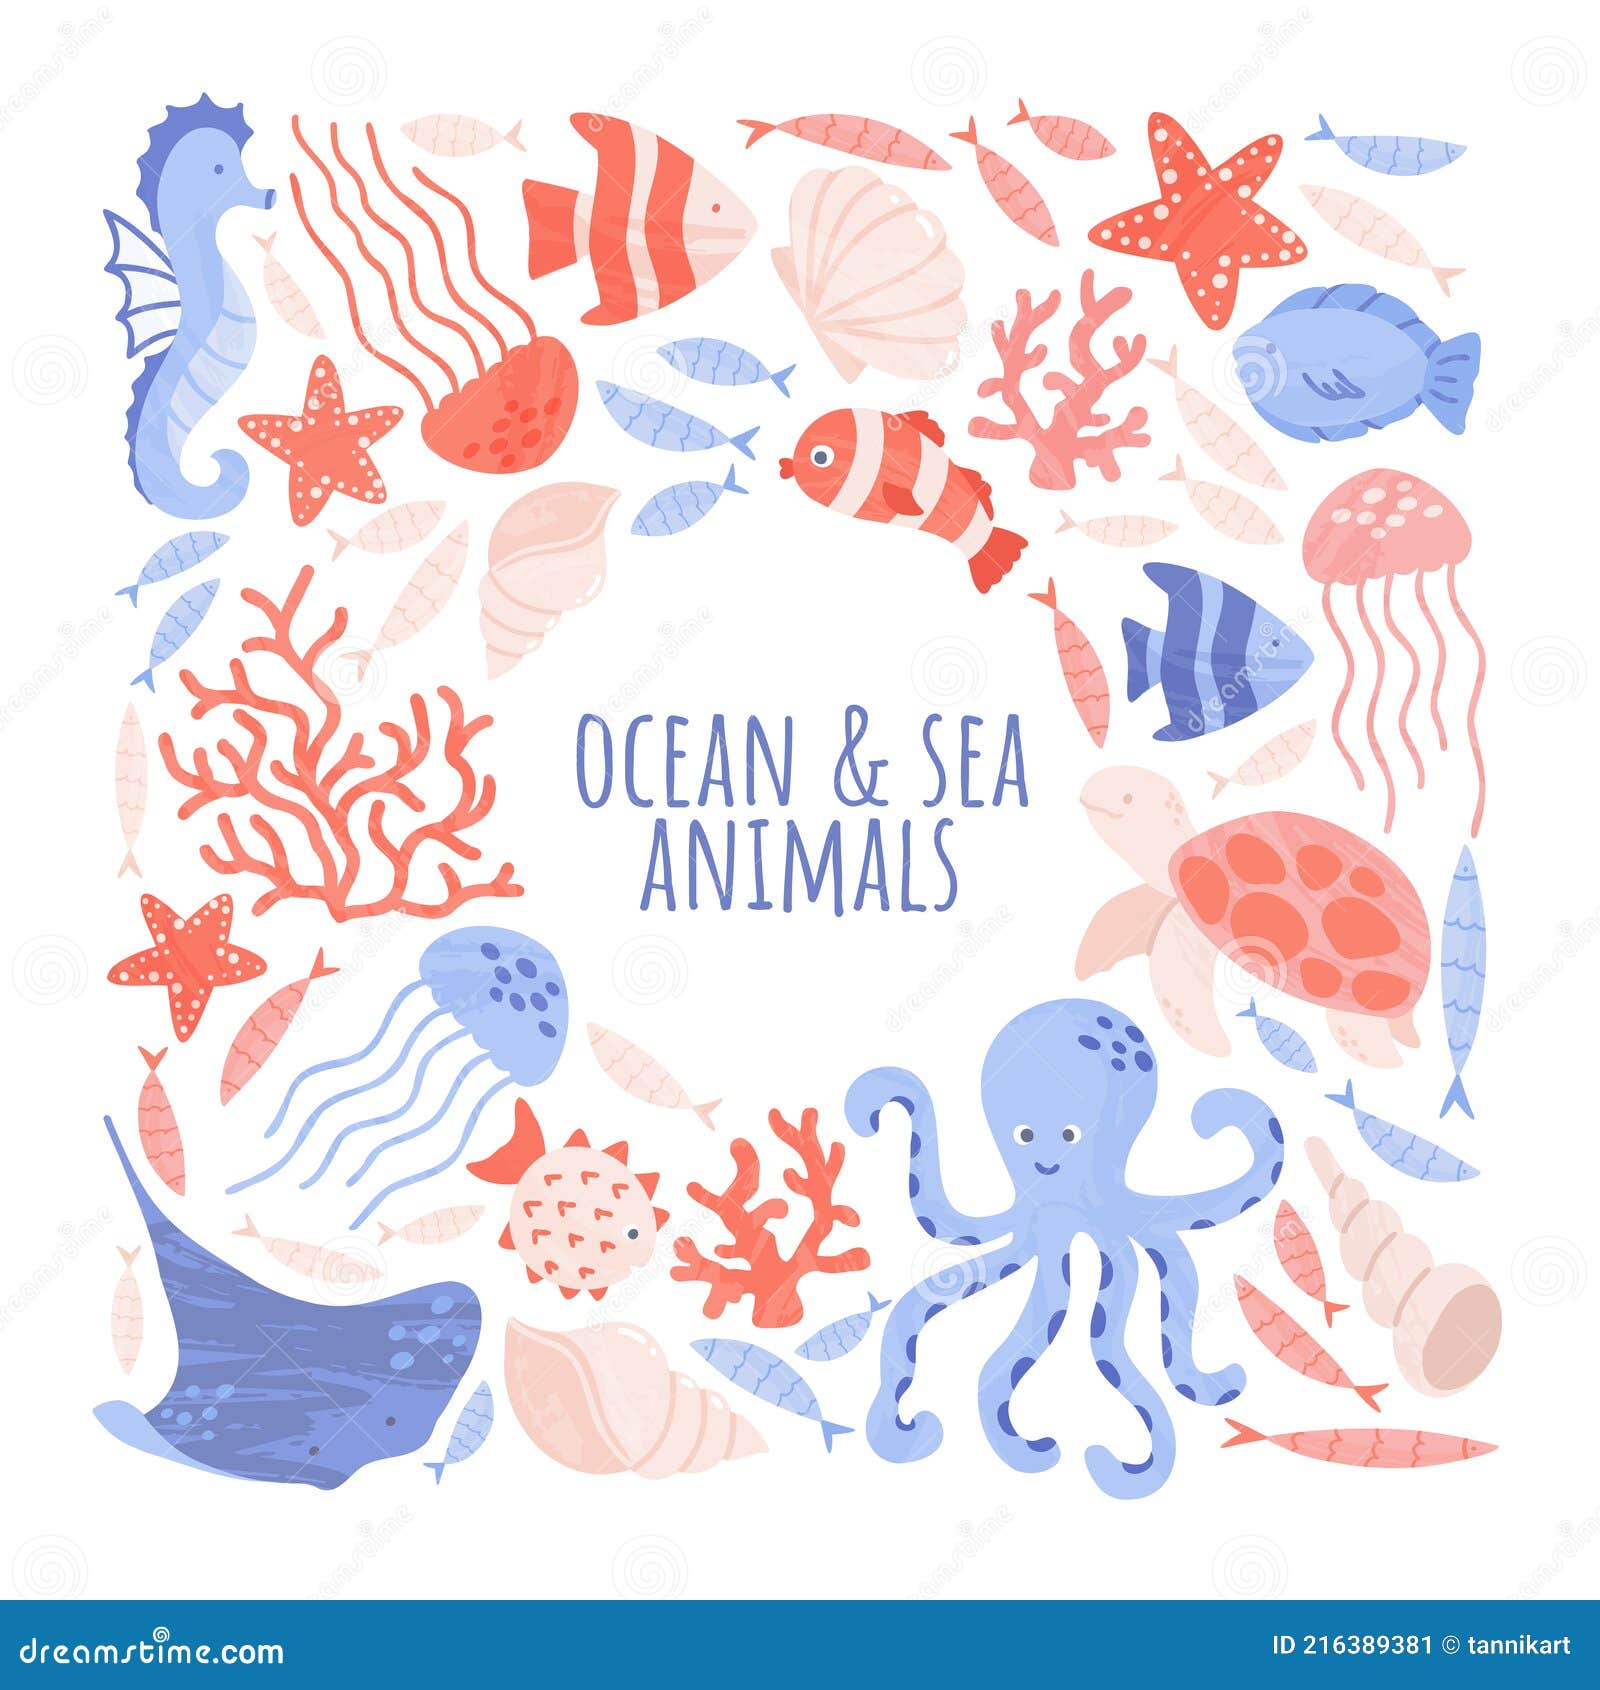 Sealife Creatures Arranged with Blank Space for Text. Pre-made Card or  Poster Design with Sea and Ocean Animals Stock Vector - Illustration of  cartoon, empty: 216389381